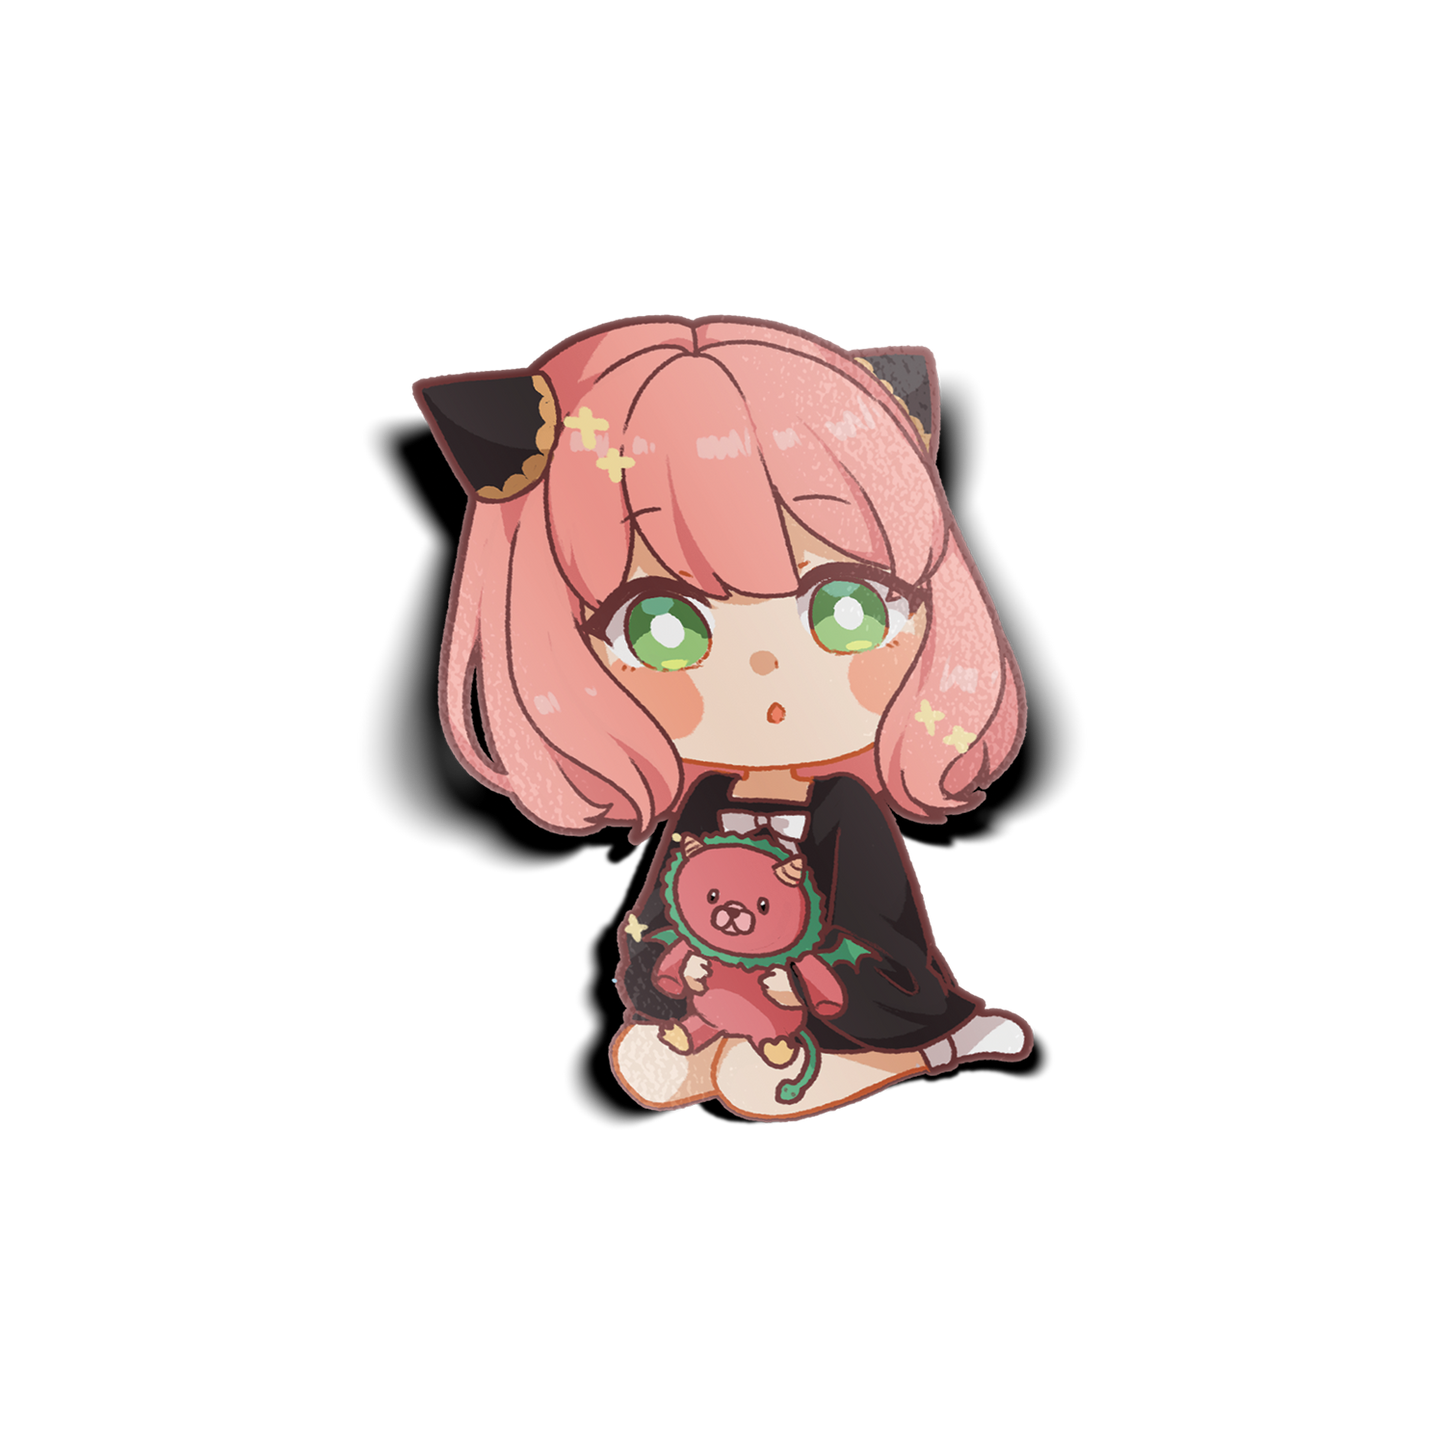 Anya with Plushie Chibi Mini Sticker design features Anya Forger from Spy x Family holding a chimera plushie in a sitting position.